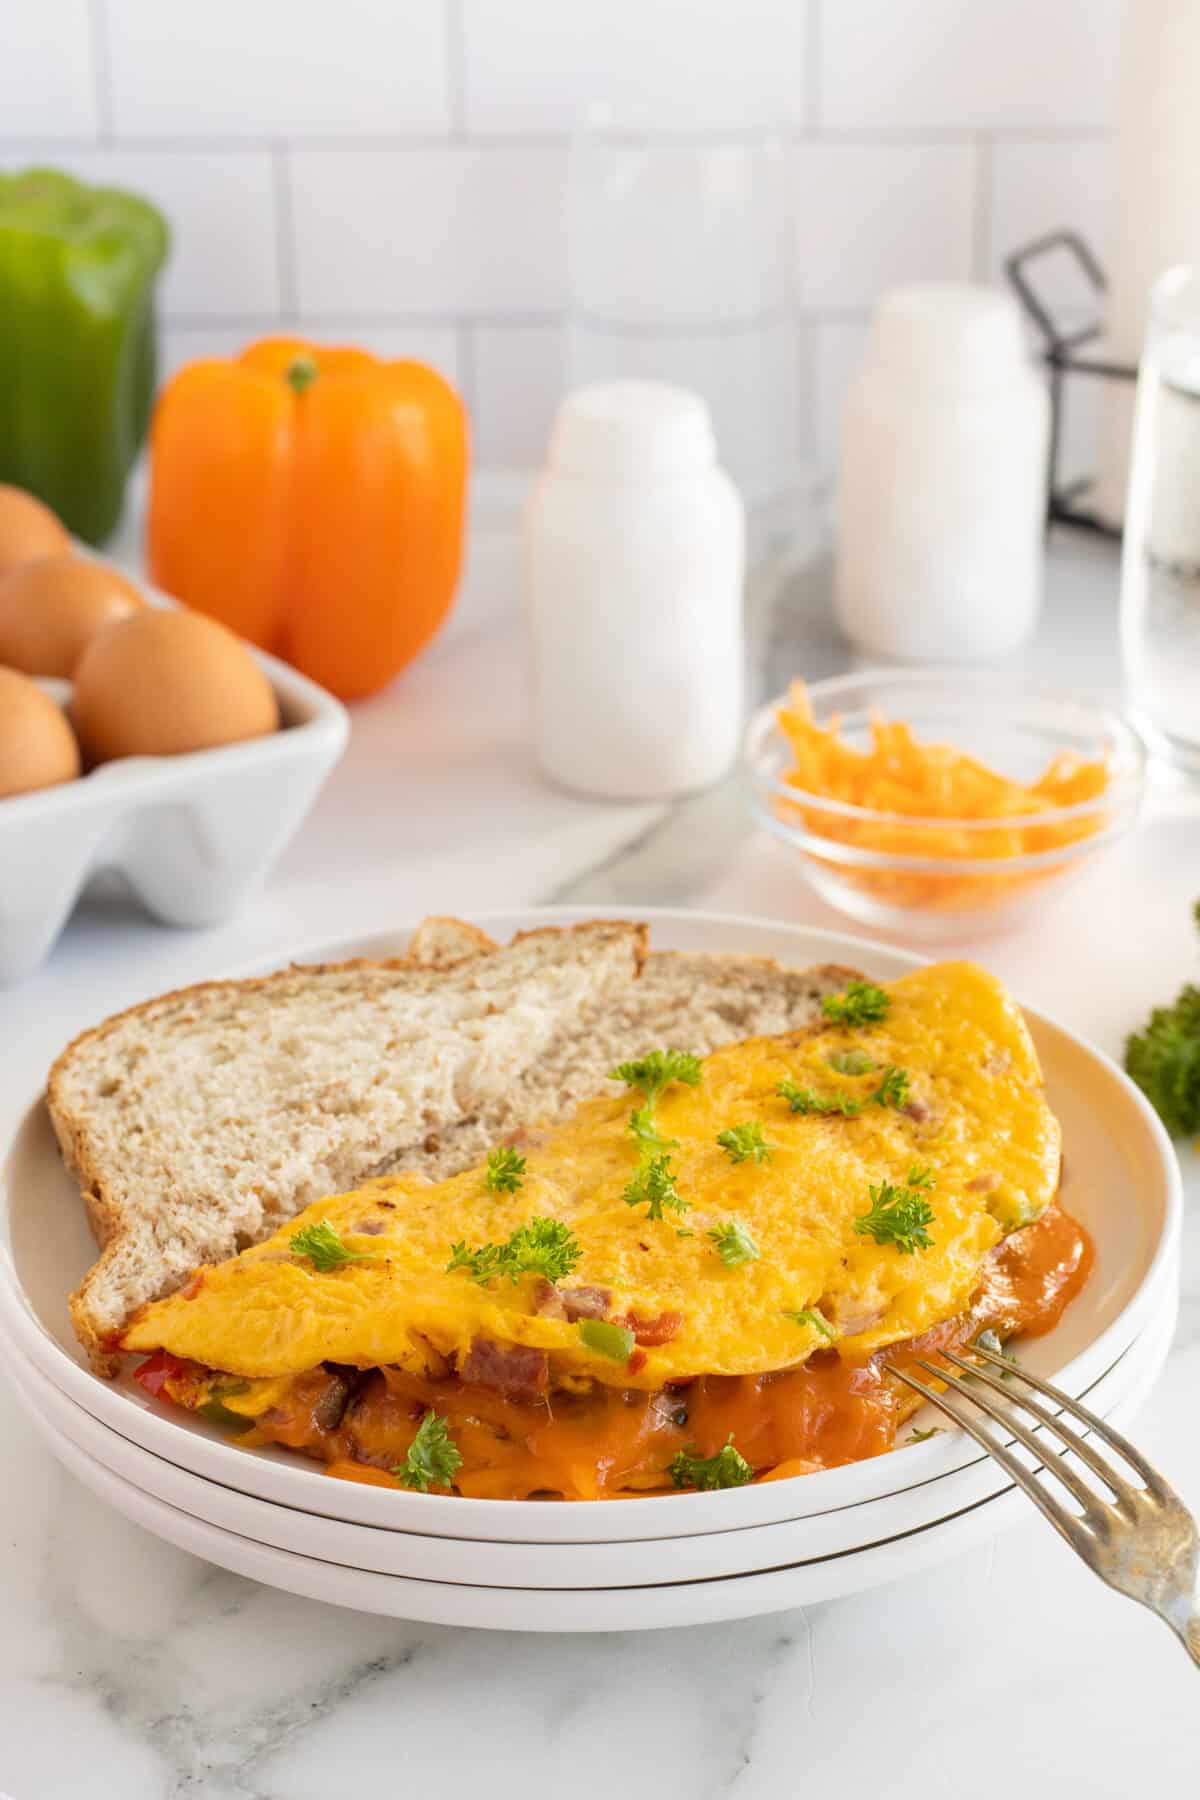 an omelet on a white plate with a slice of brown bread